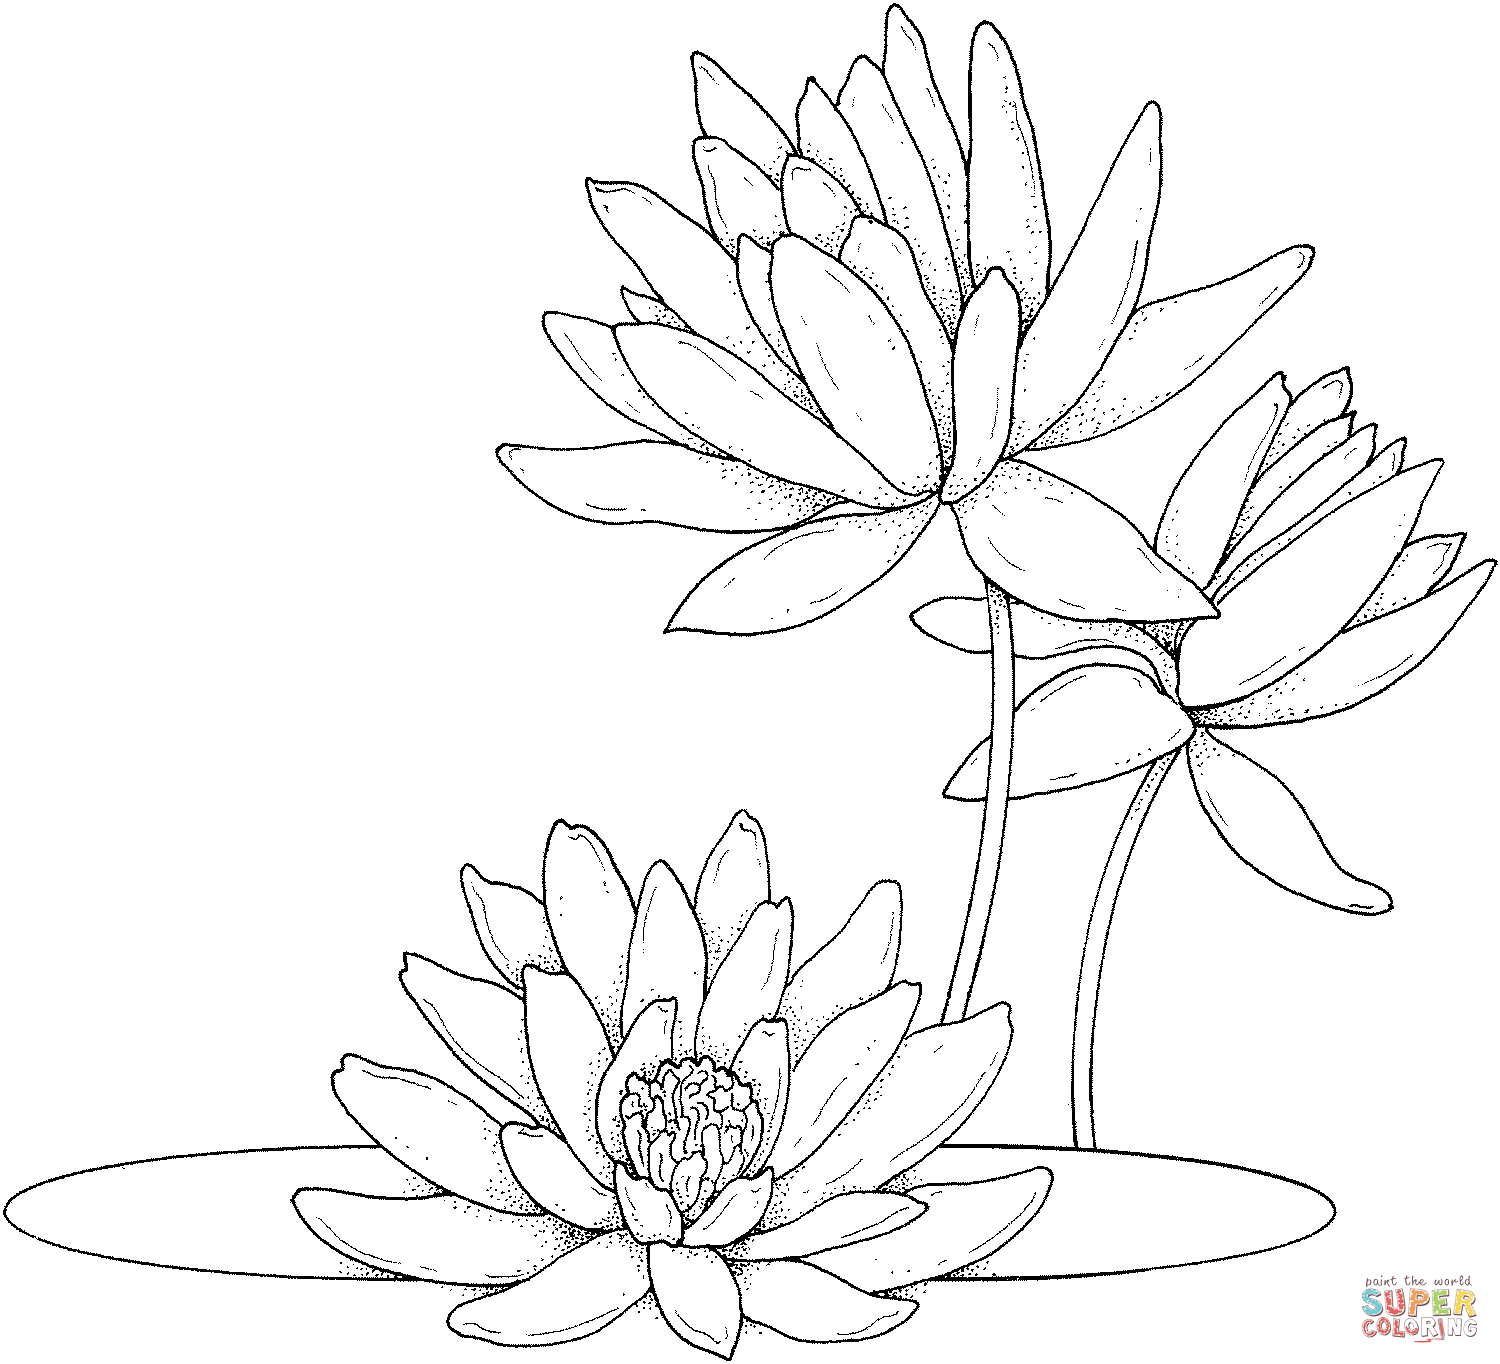 Water lilies coloring page | Free Printable Coloring Pages